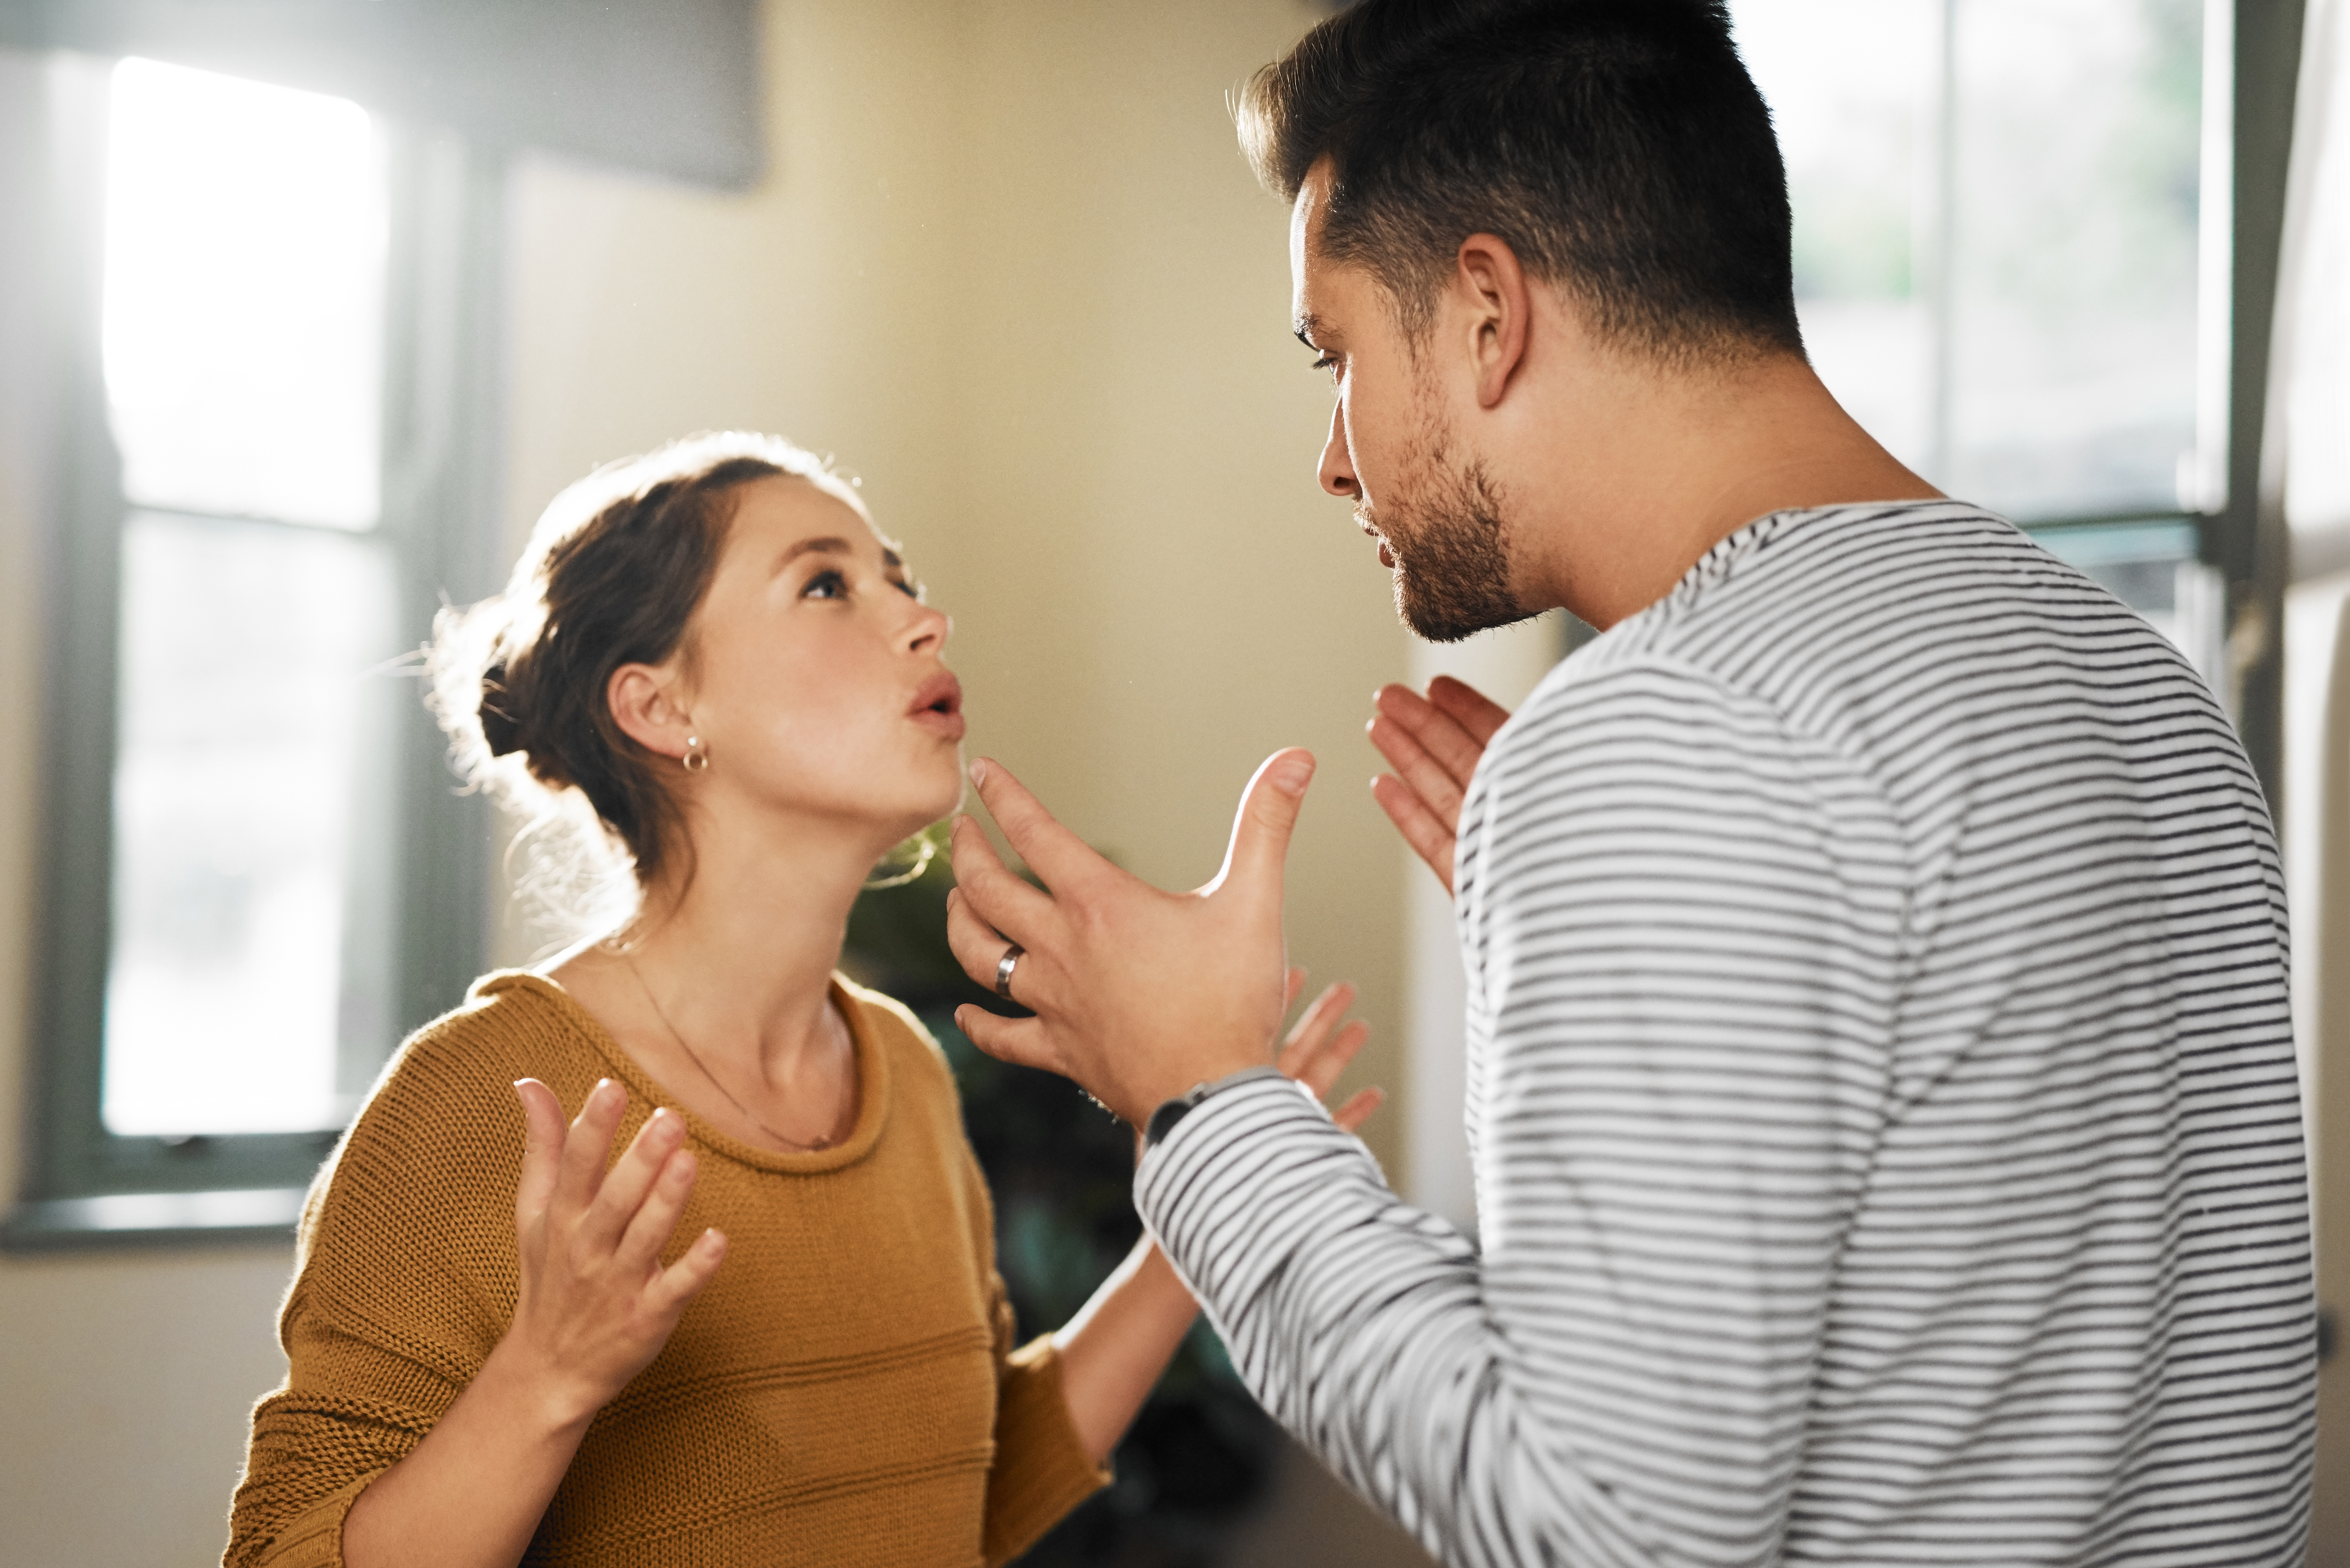 A couple is pictured having an argument | Source: Getty Images